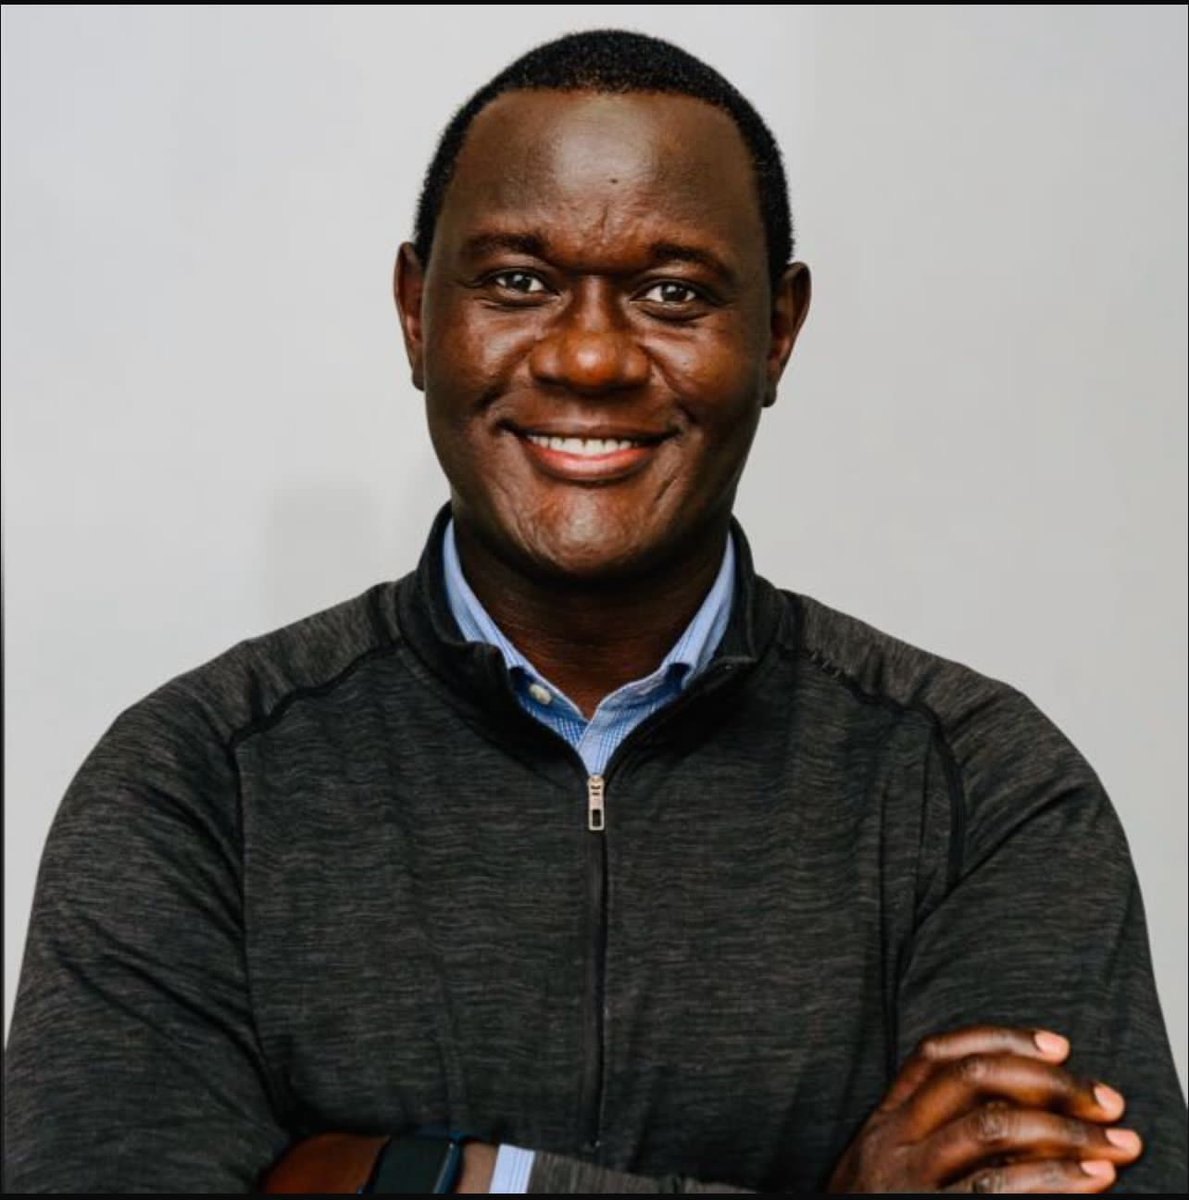 Meet our panelist for the upcoming #InternationalWidowsDay a remarkable individual whose life and work embody resilience, compassion, and unwavering dedication to uplifting the marginalized. 
Peter Abungu:

Peter Abungu was born January 6, 1977 in Siaya County of Western, Kenya